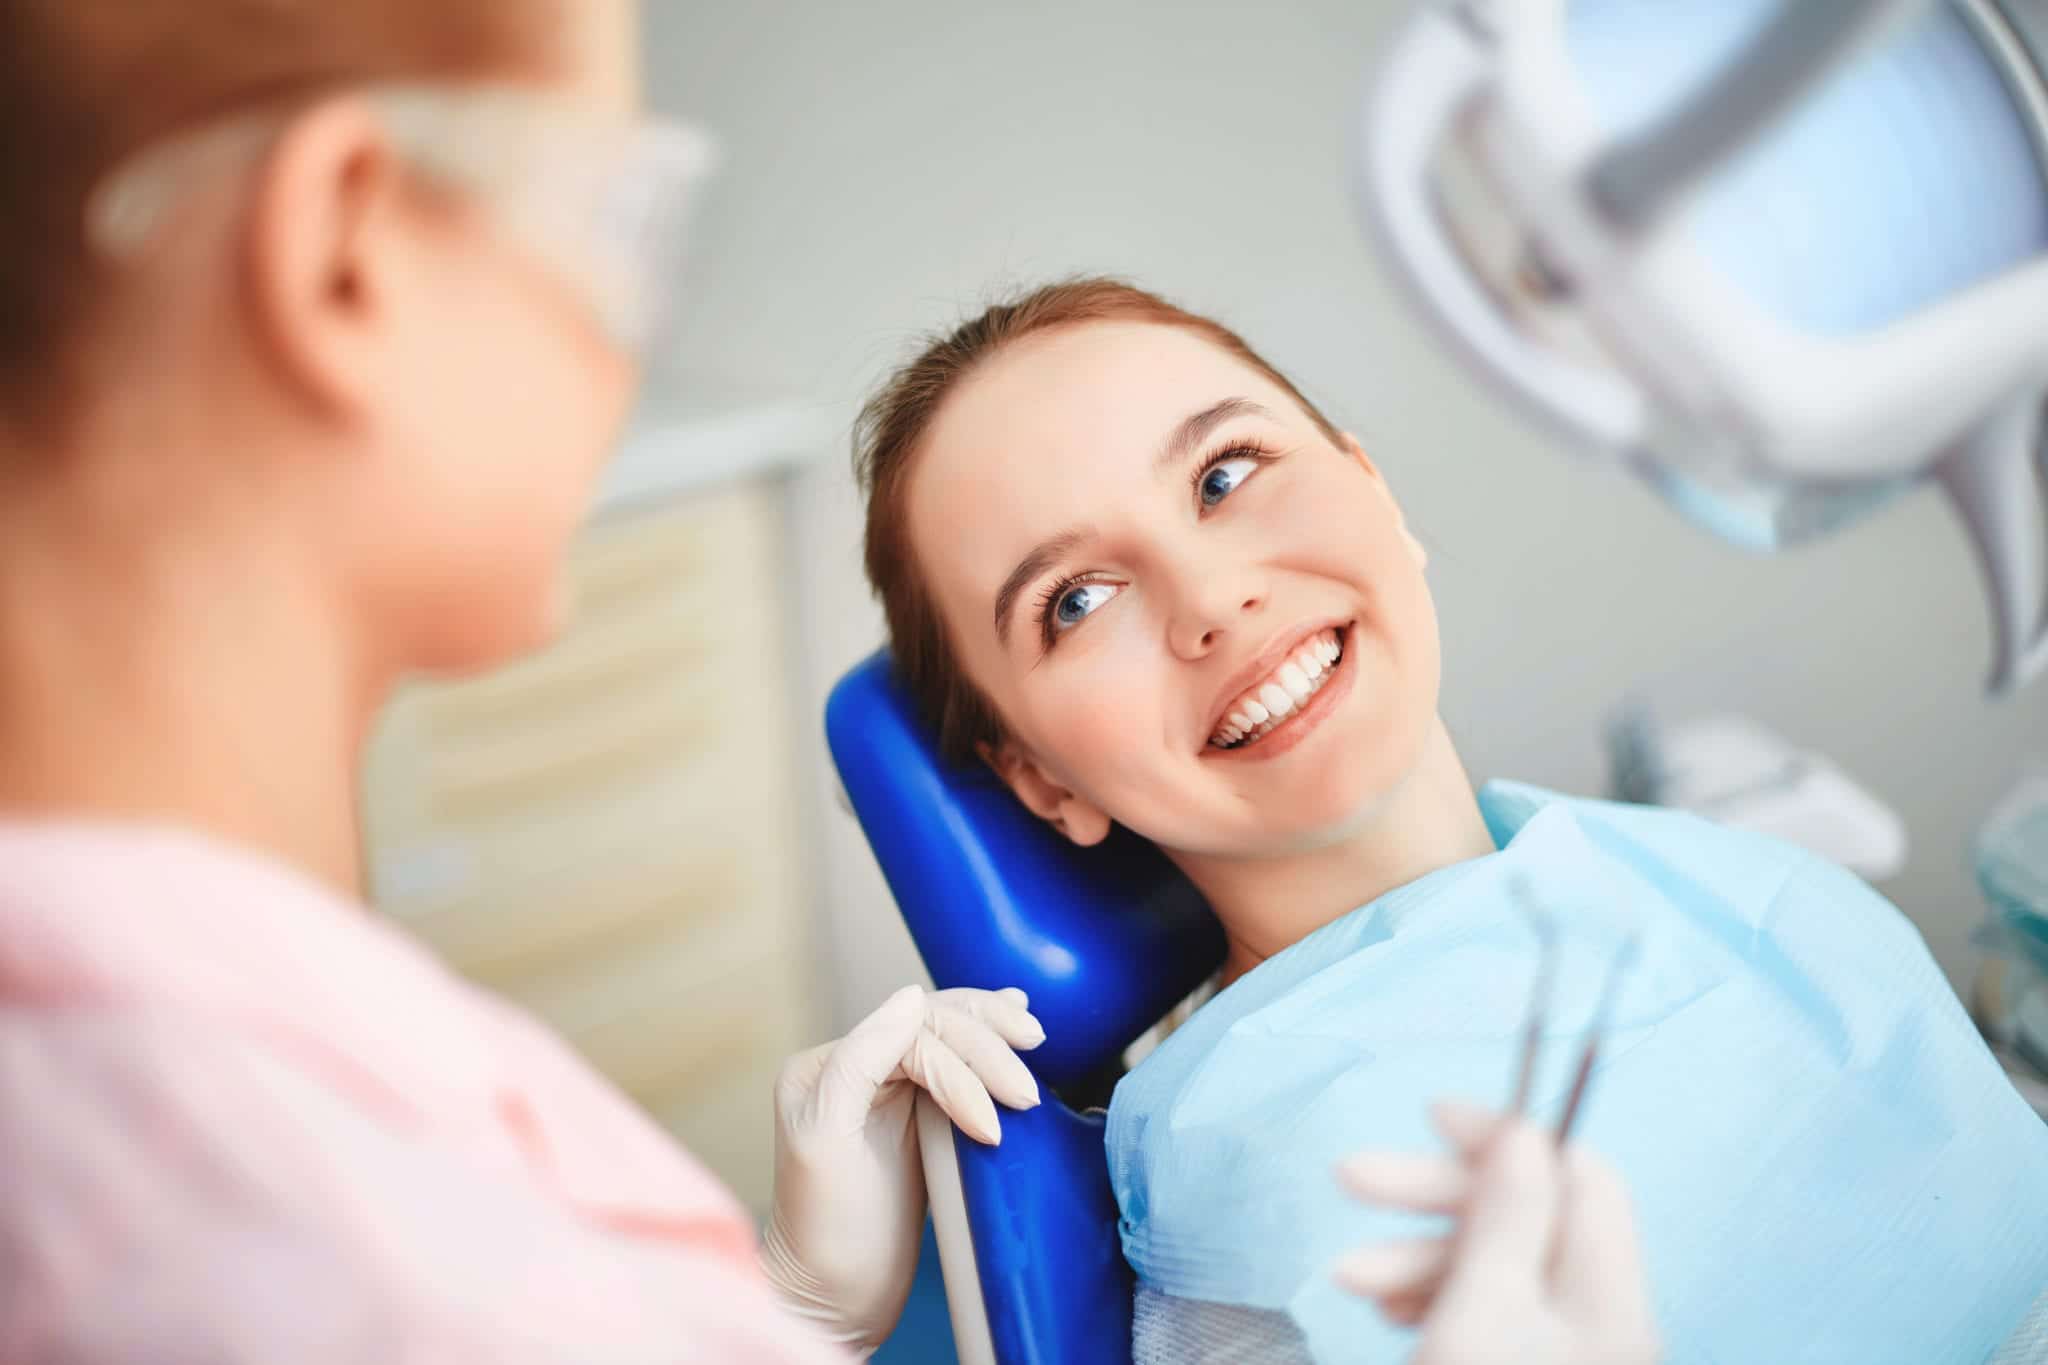 Make 2020 Your Year for Preventative Dental Care